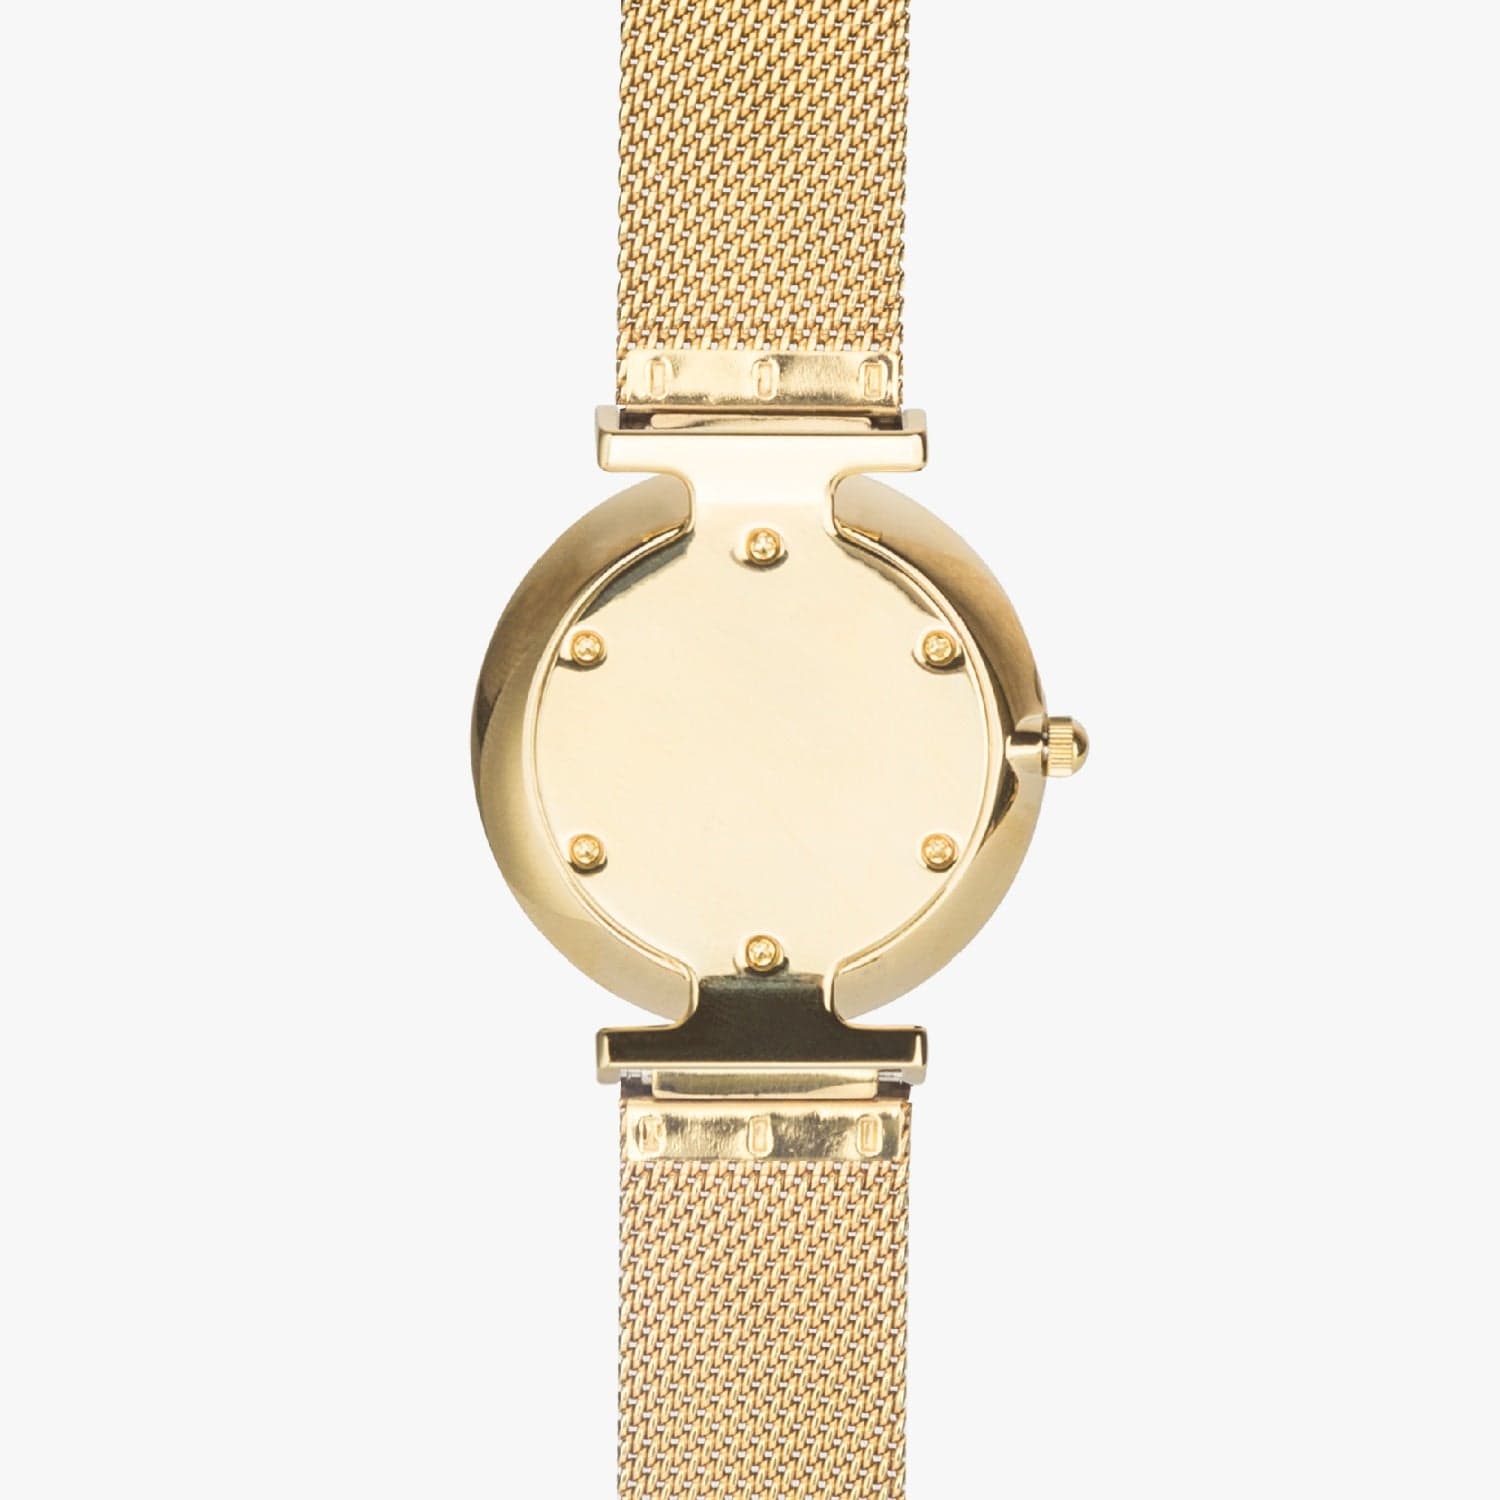 Give your heart wings, New Stylish Ultra-Thin Quartz Watch, designed by Sensus Studio Design